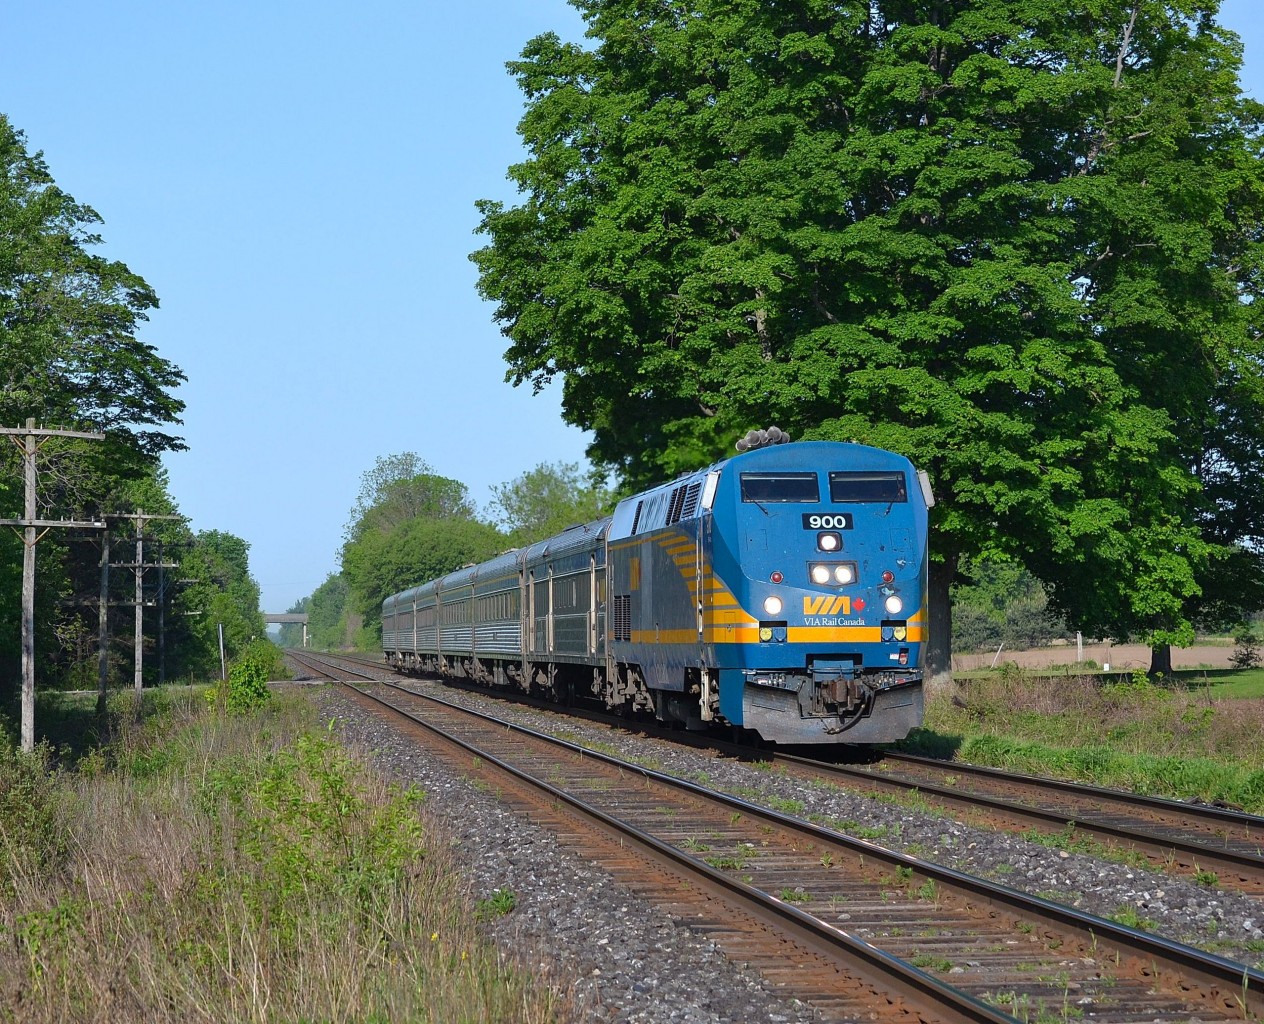 VIA 70 led by 900, heads eastbound after just departing Woodstock.